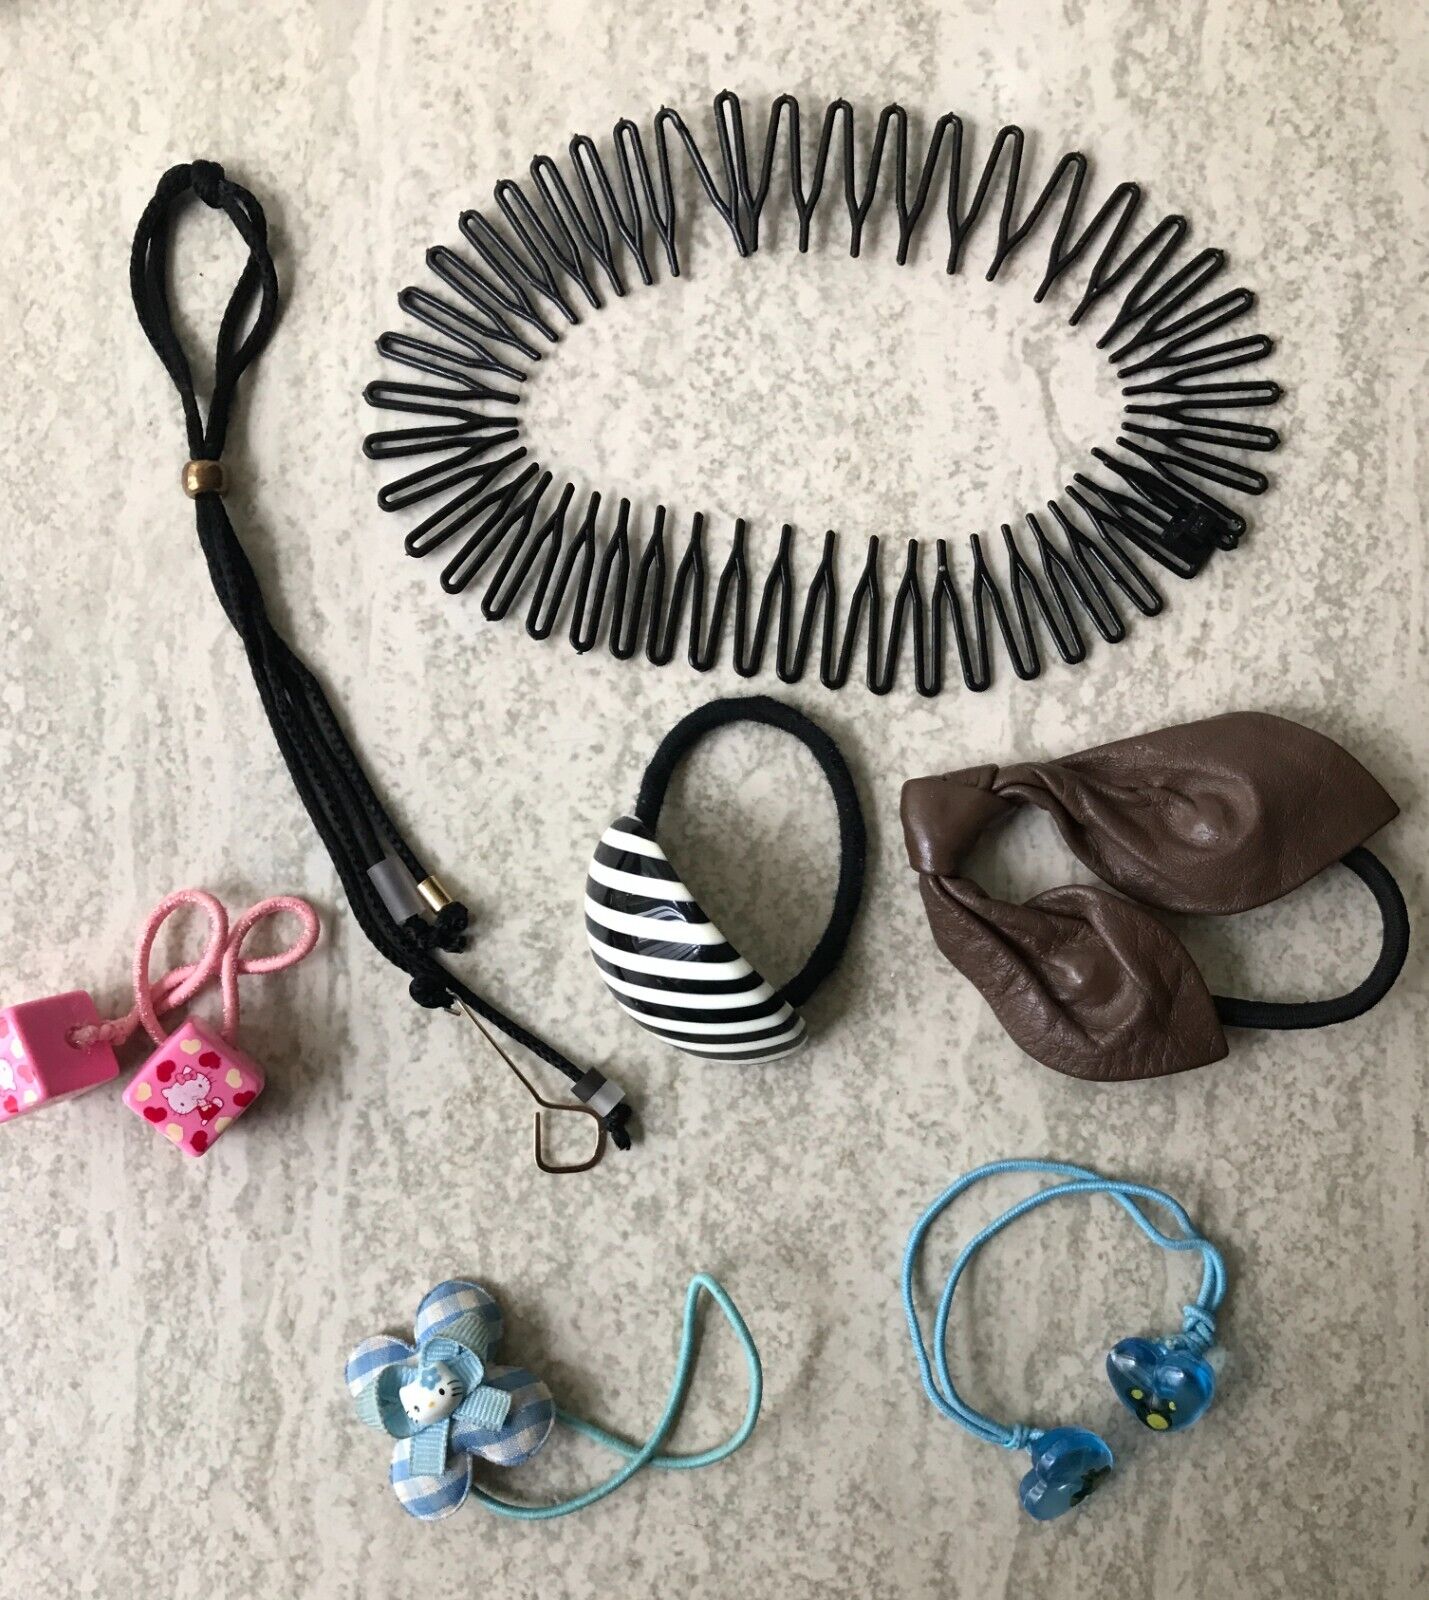 HELLO KITTY ACCESSORIES VINTAGE LOT PONYTAILS 7 PIECES LEATHER HAIR COMB